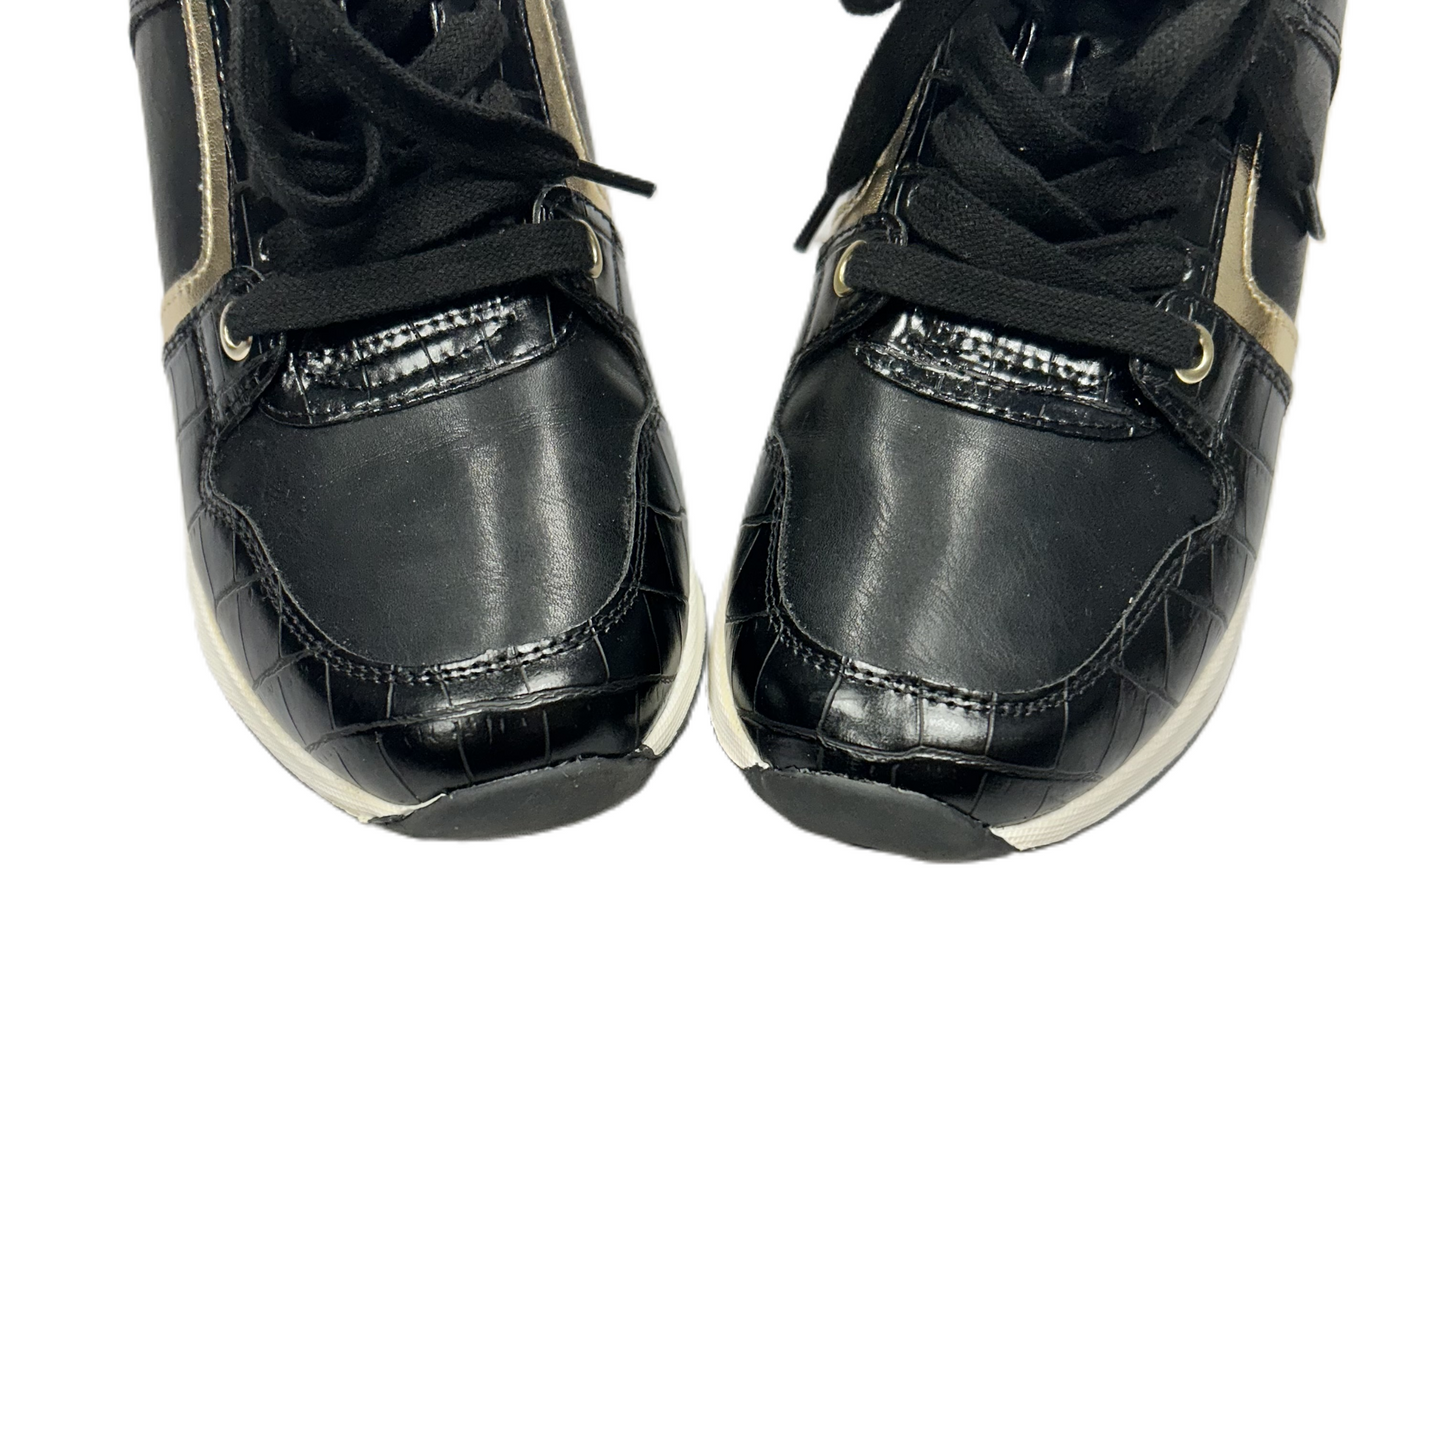 Black & Gold Shoes Sneakers By Aldo, Size: 7.5